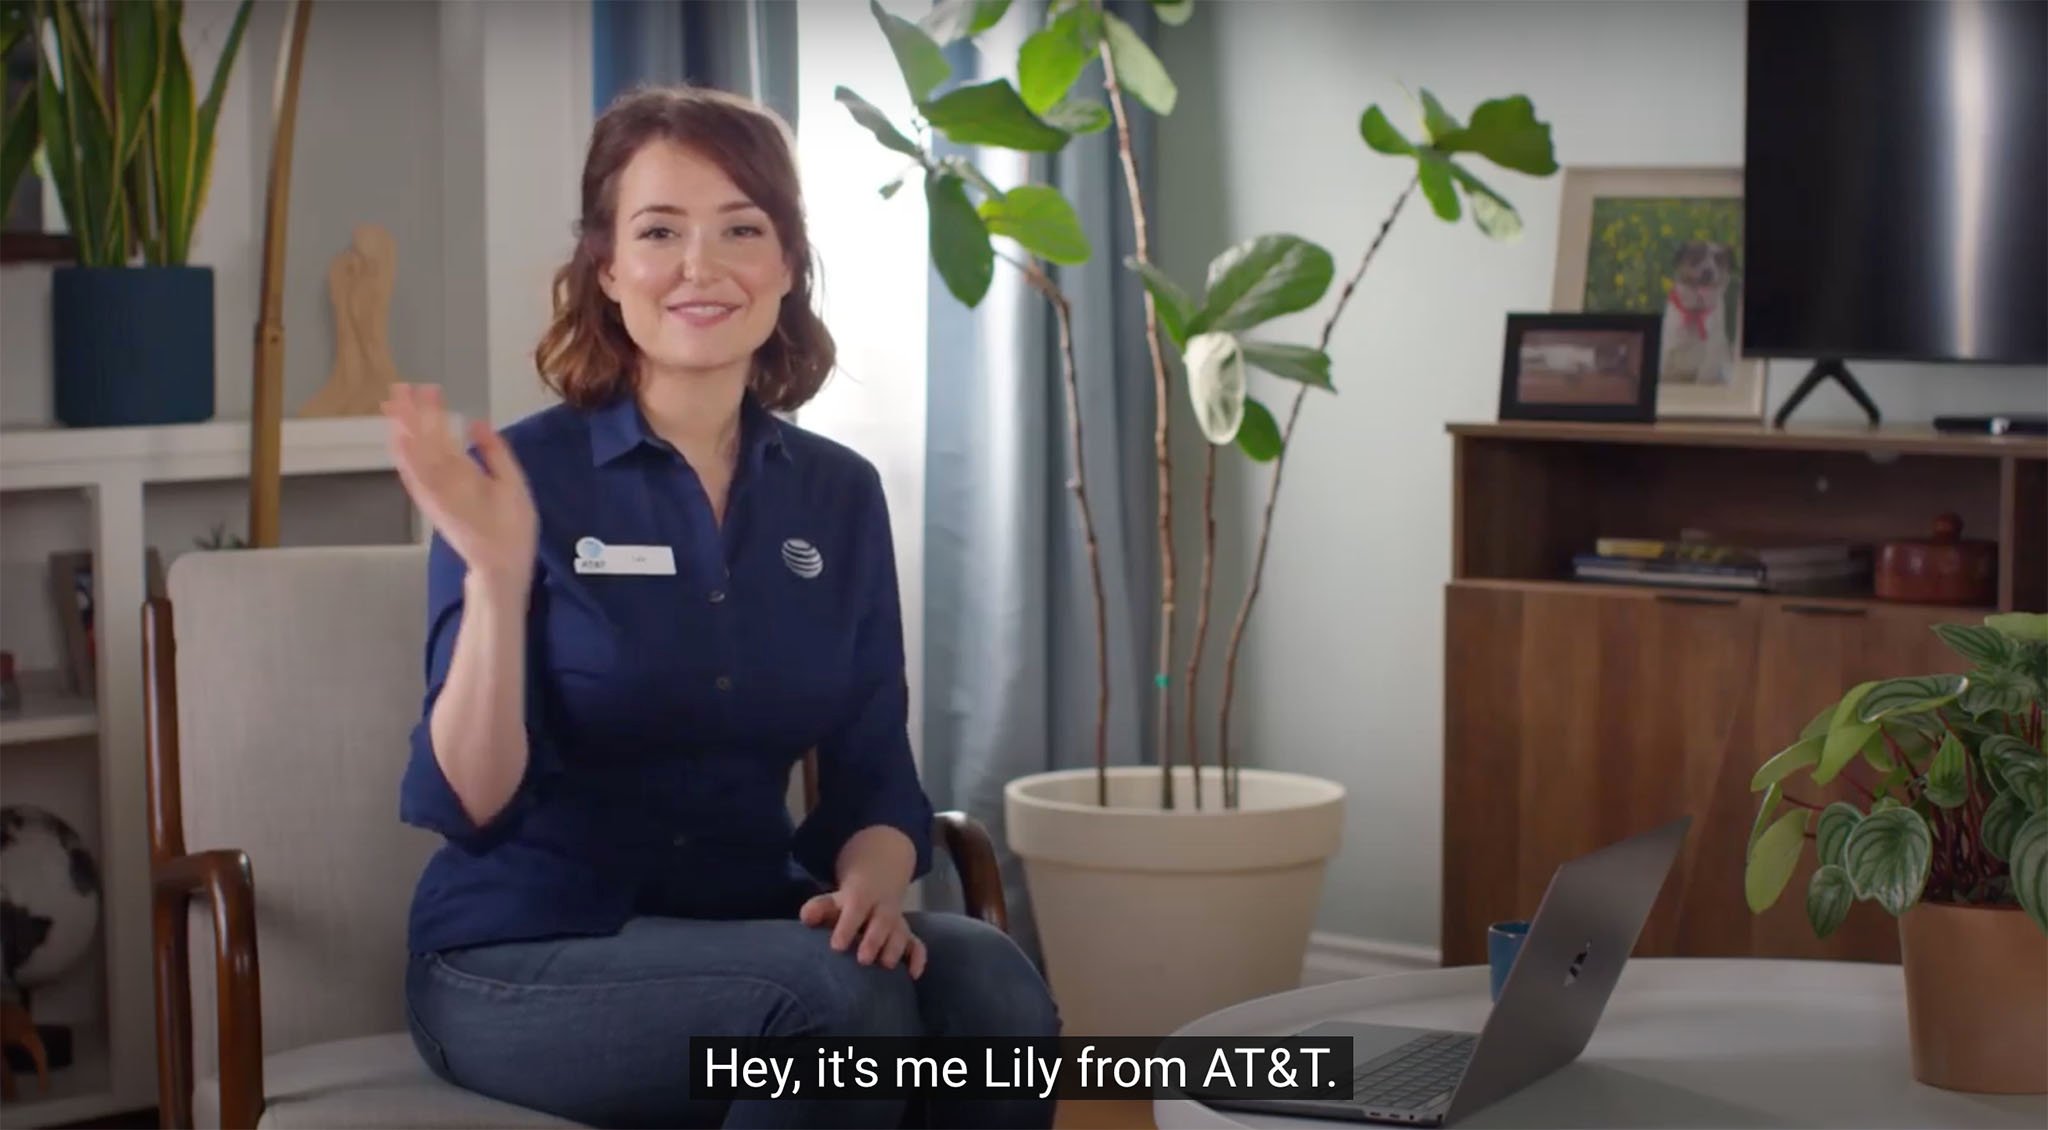 Milana Vayntrub is known for playing AT&T salesperson Lily in AT&T commercials